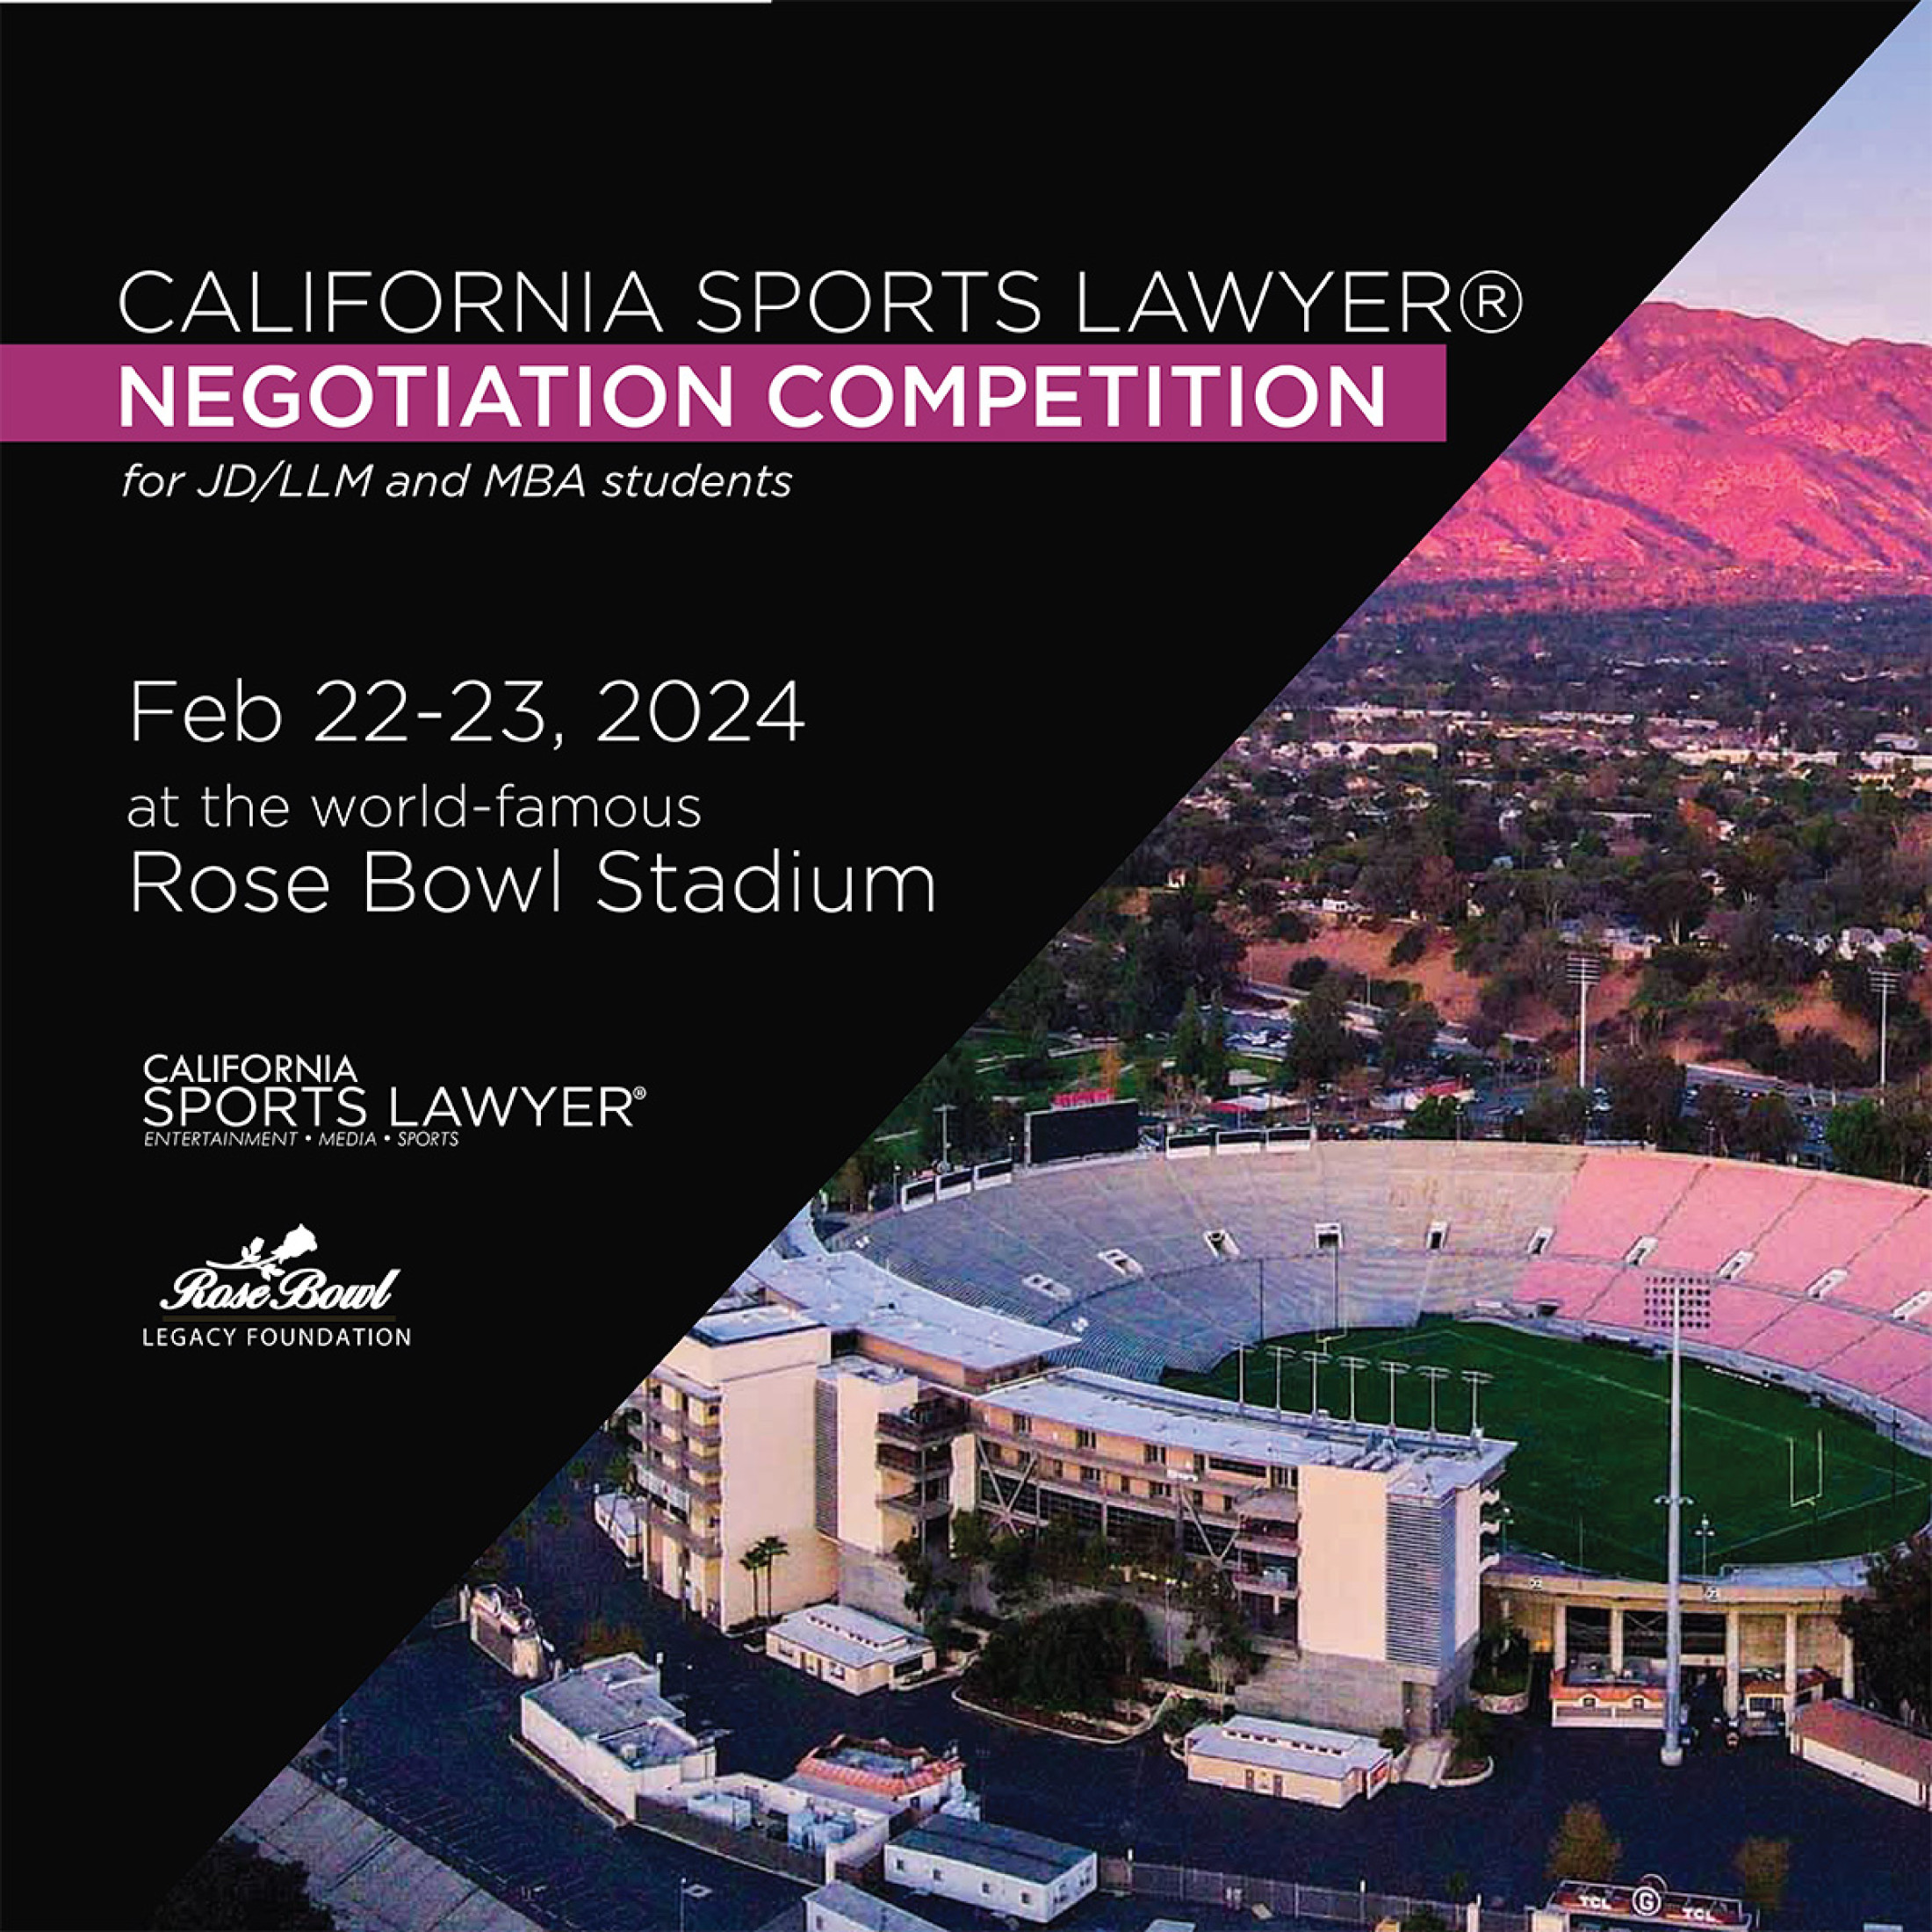 California Sports Lawyer Negotiation Competition